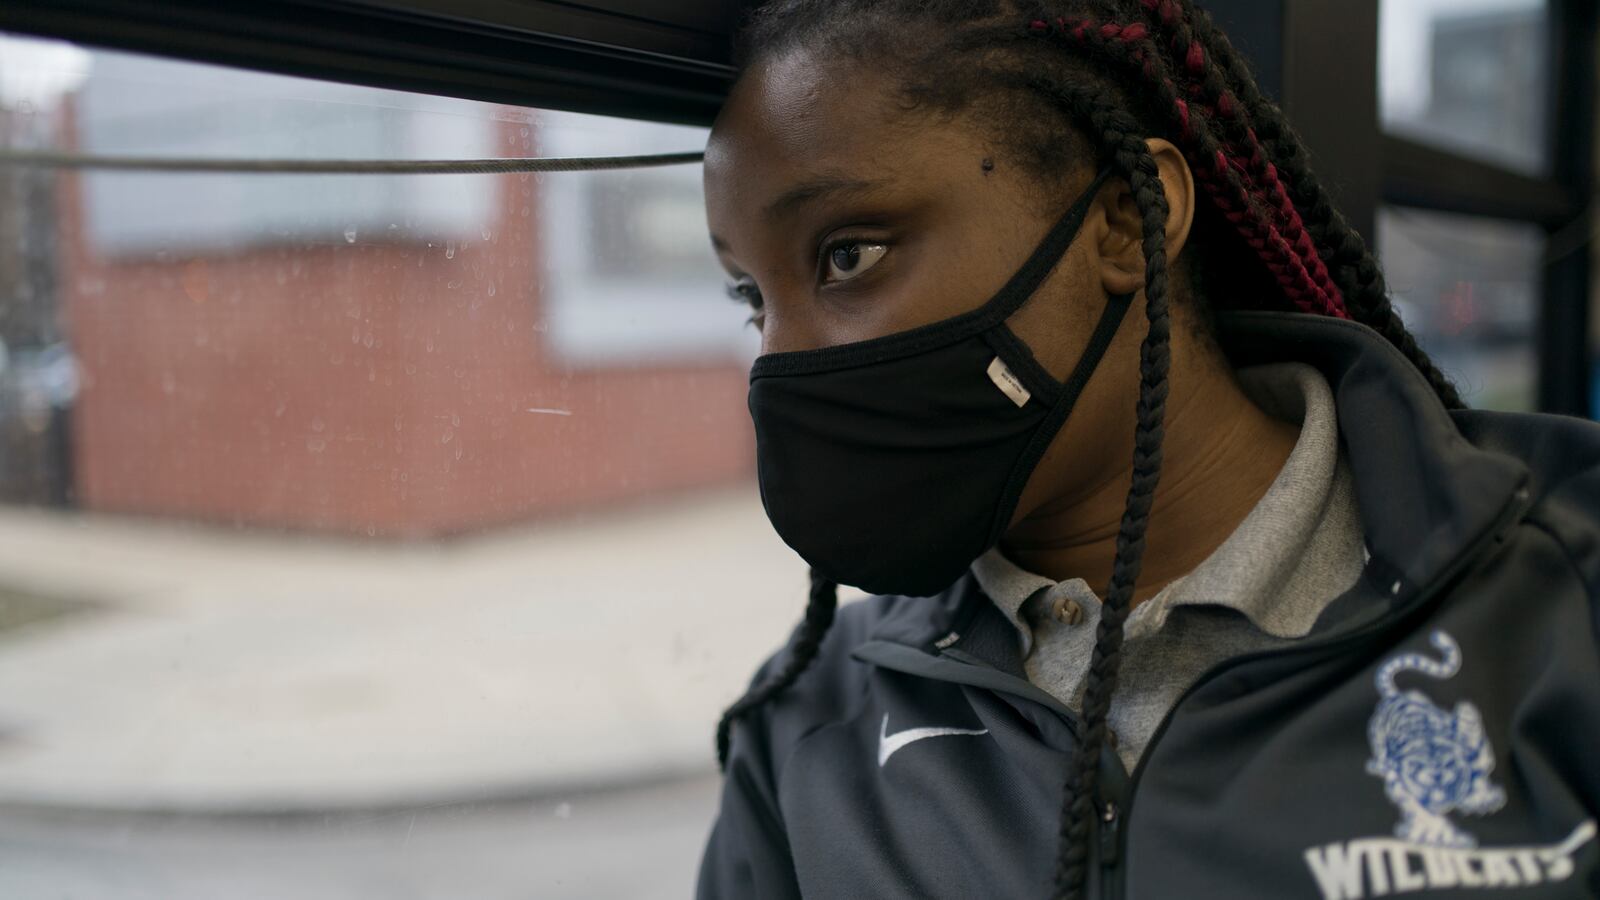 A young woman looks out of a bus window, wearing a black mask with long braided hair. She is wearing a grey track jacket with a school logo near the lapel.